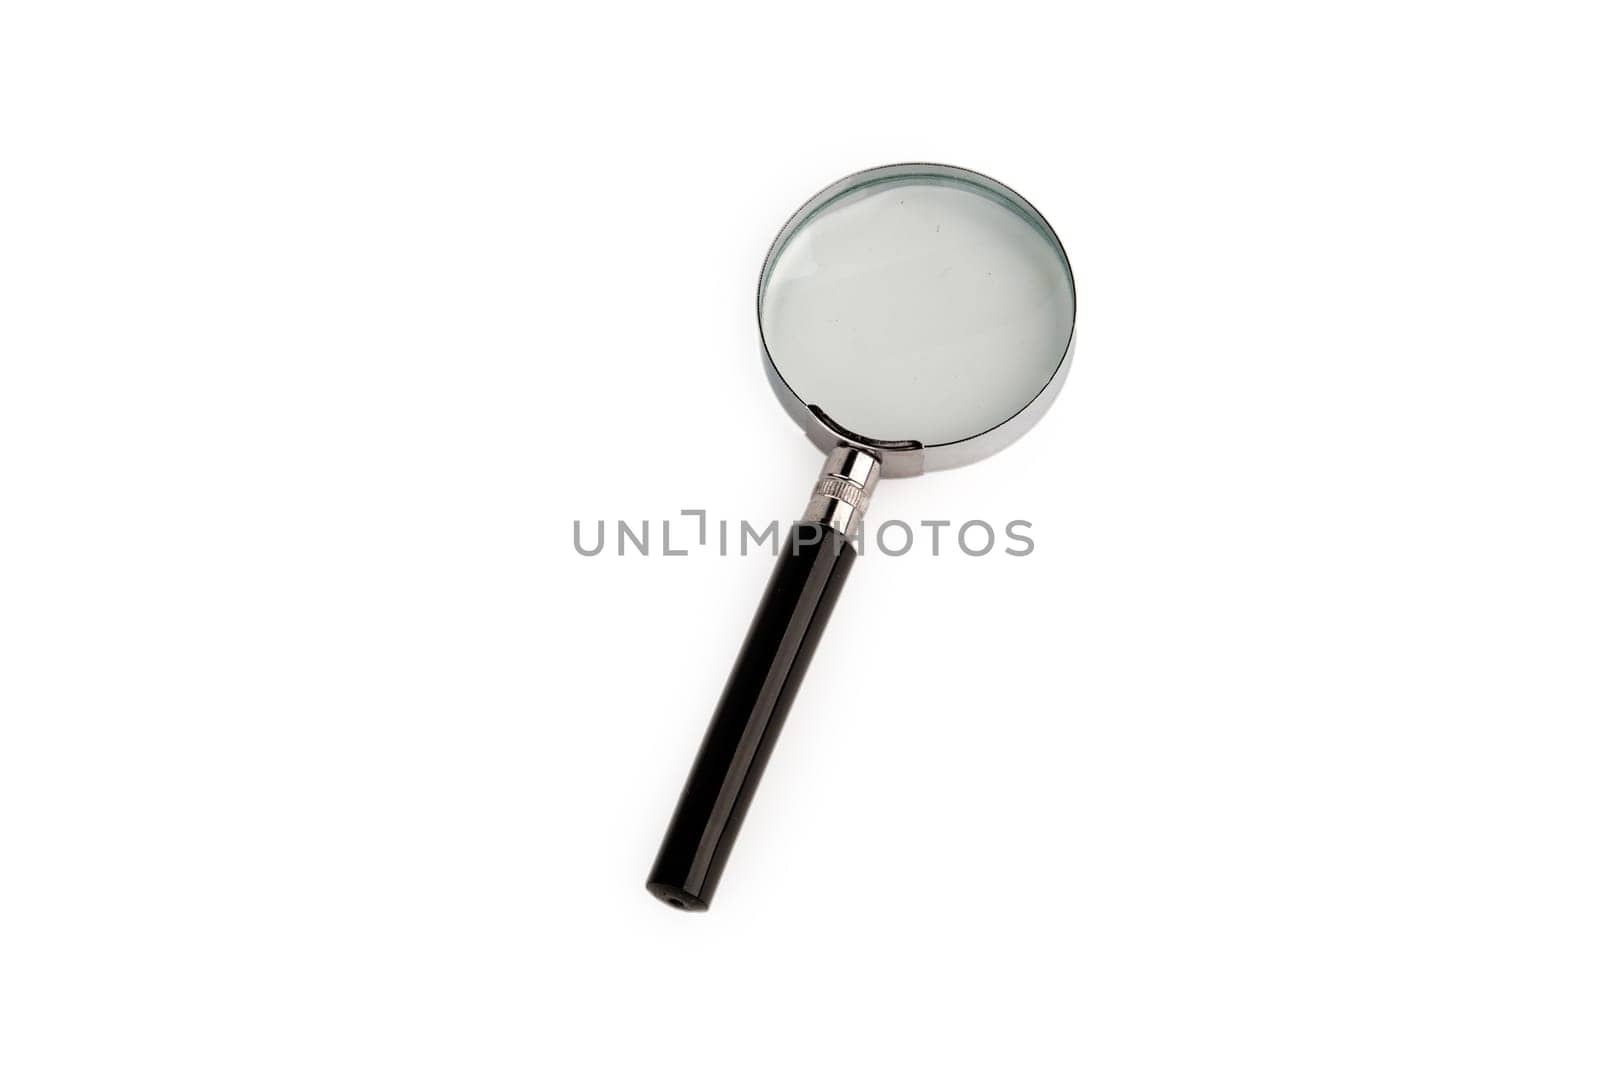 A magnifying glass with a black handle lying on a white background